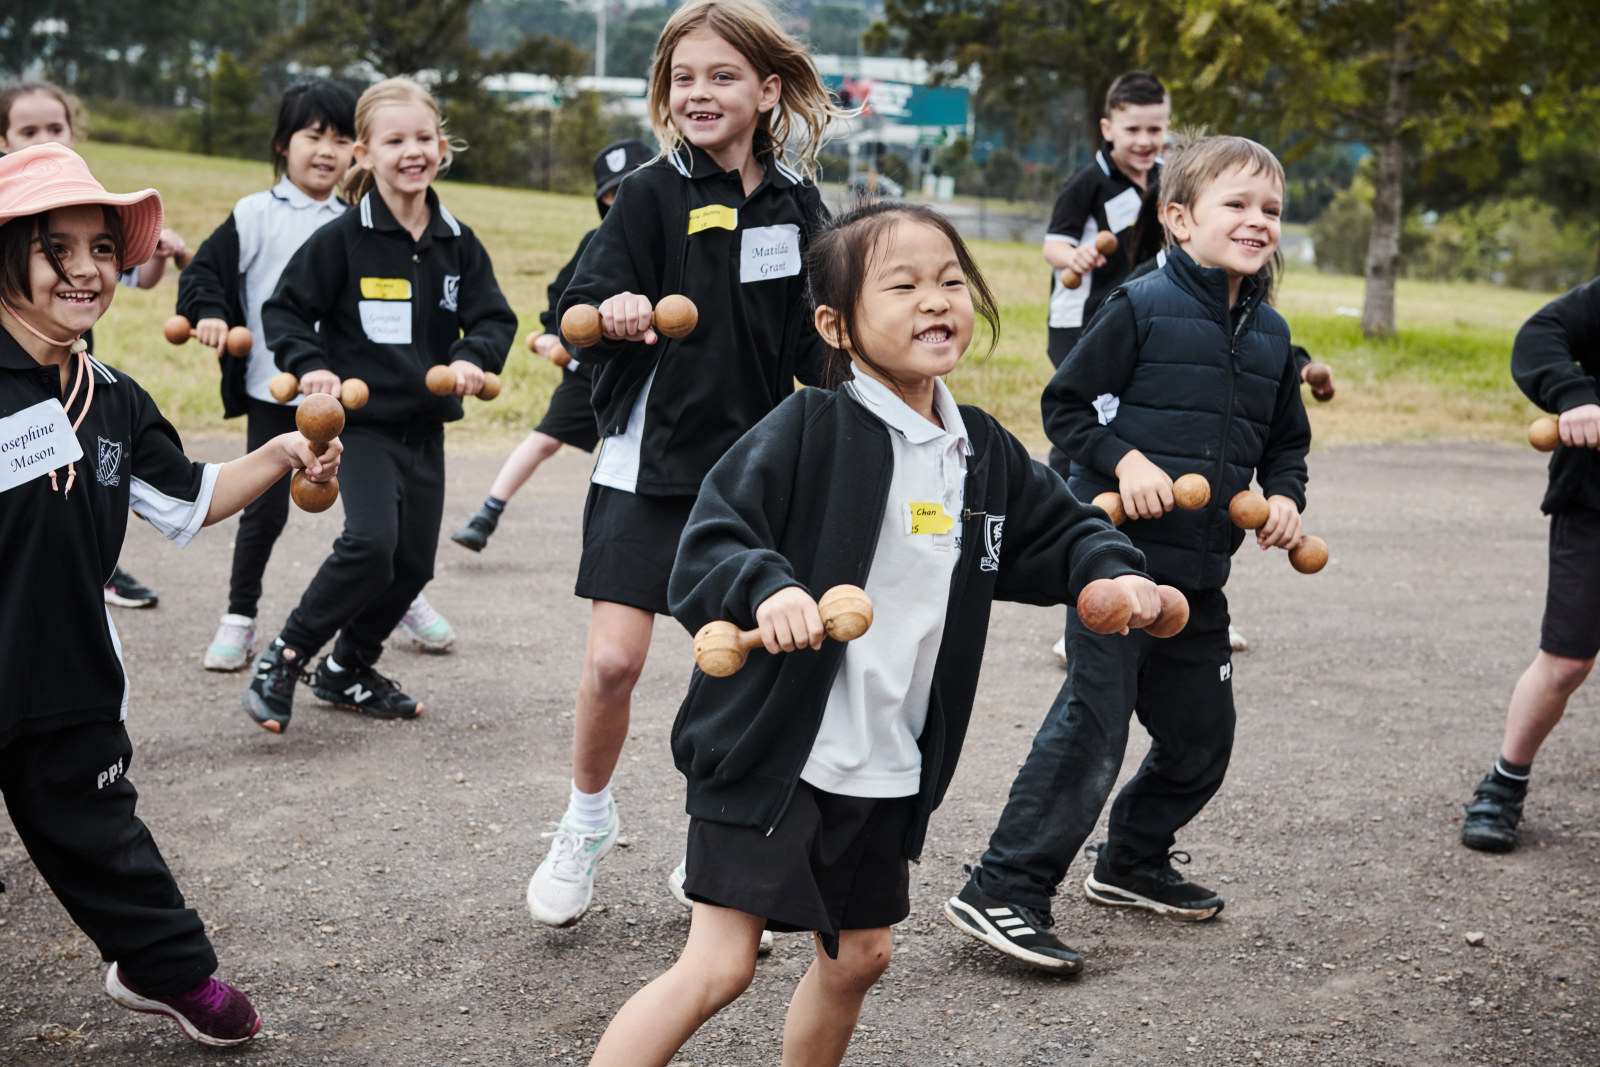 Calisthenics with wooden dumbbells being performed by students as part of Lessons from the Past at Rouse Hill Estate